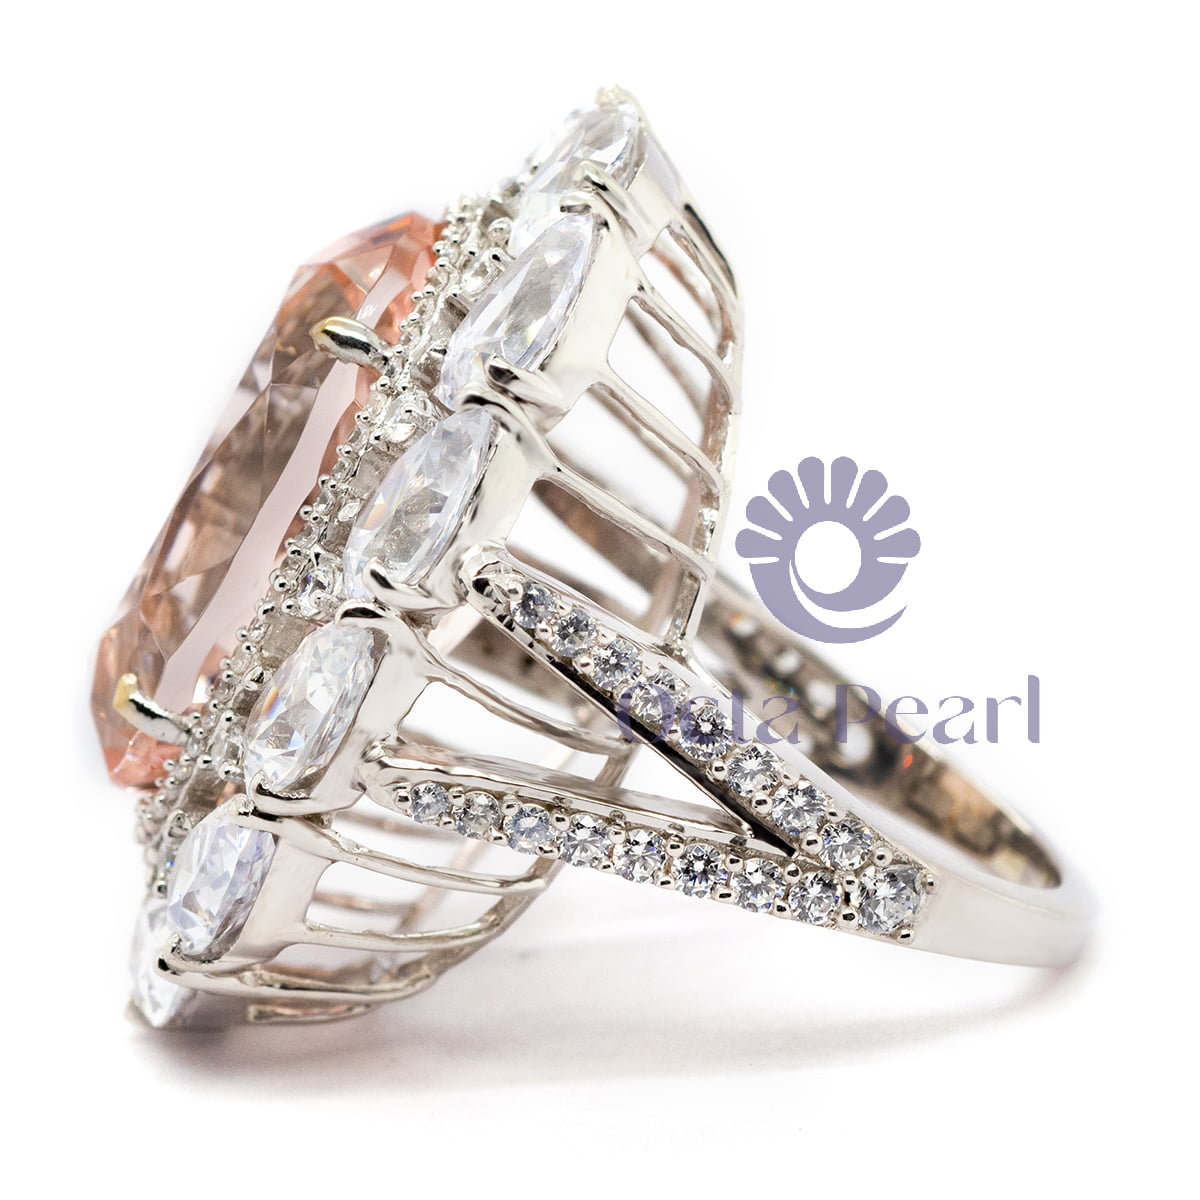 925 Silver Orangy Pink Oval & White Pear Cut CZ Stone Halo Cocktail Ring For Women